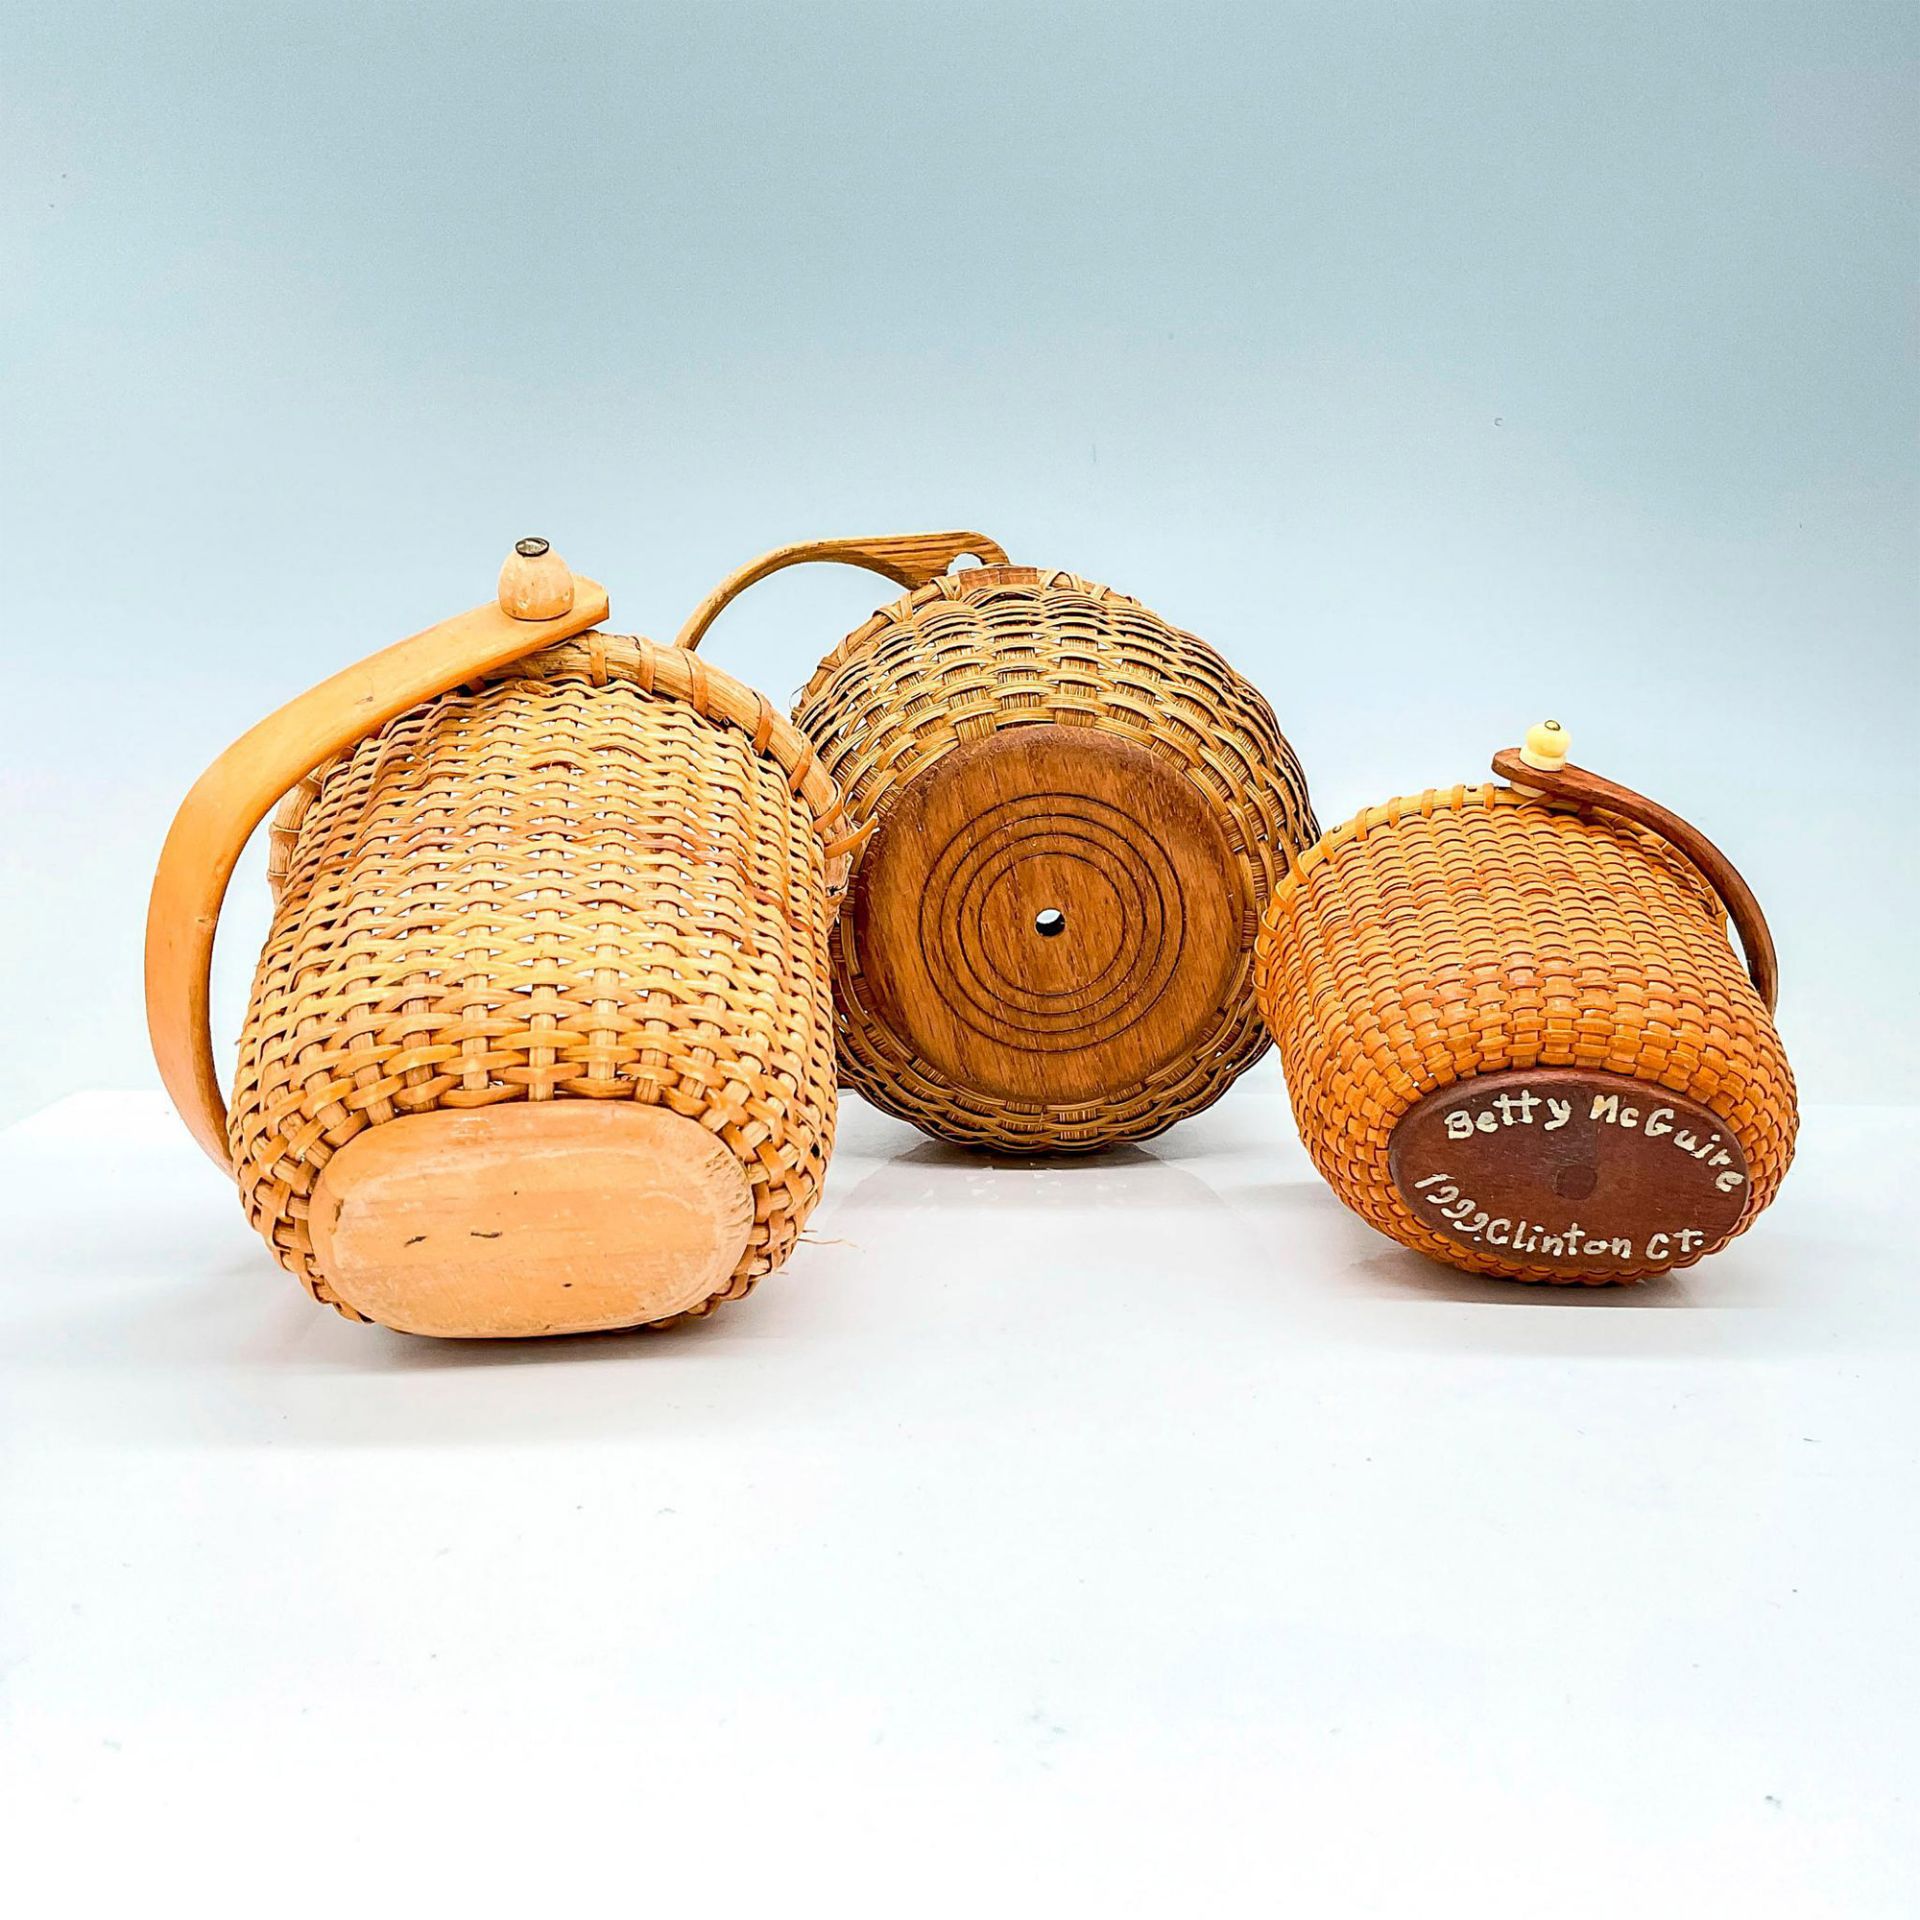 3pc Small Hand-Woven Nantucket Style Baskets - Image 3 of 3